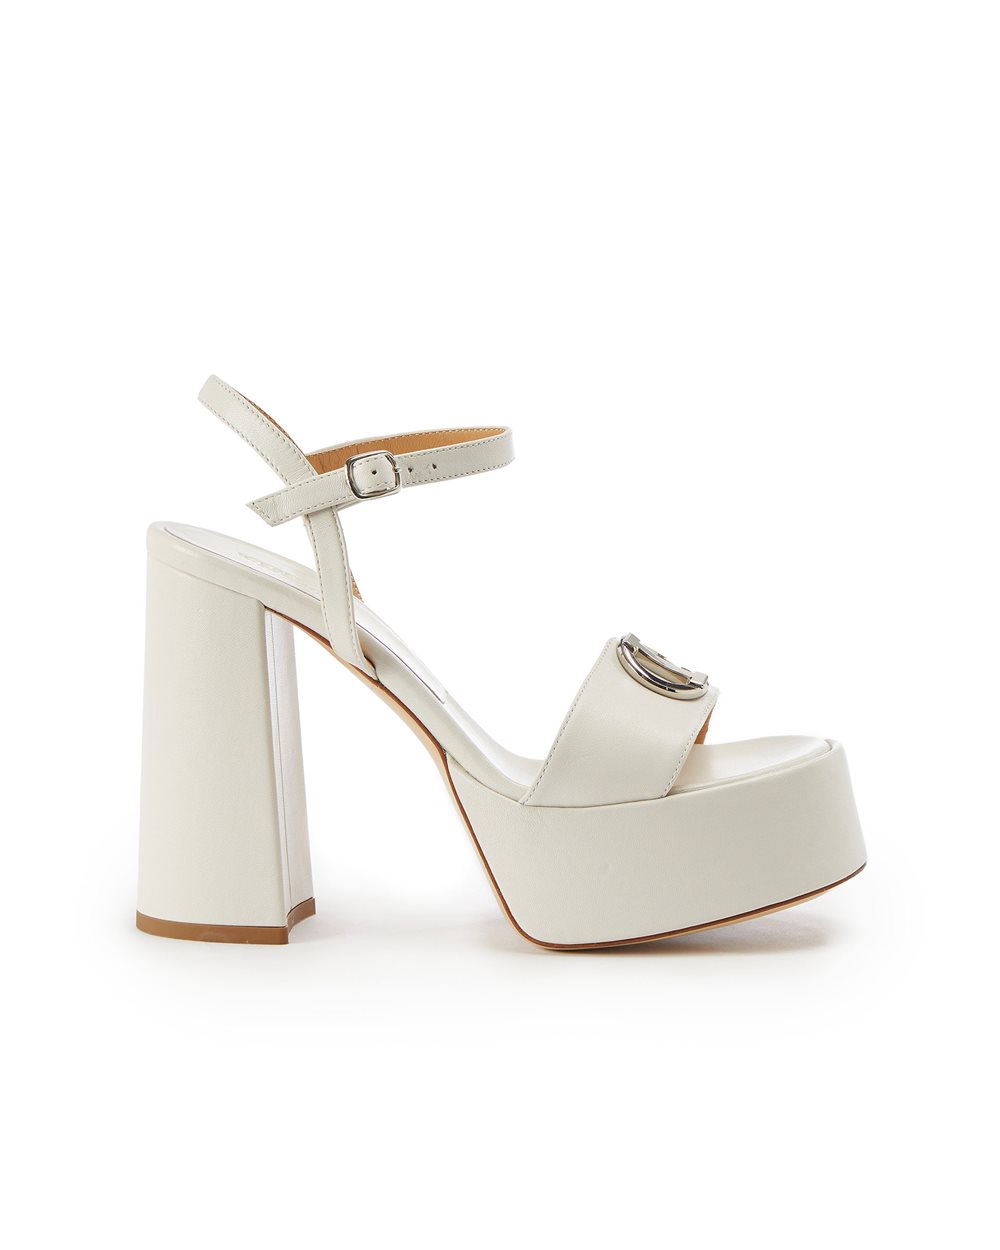 Sandals with platform and logo - Accessories | Iceberg - Official Website